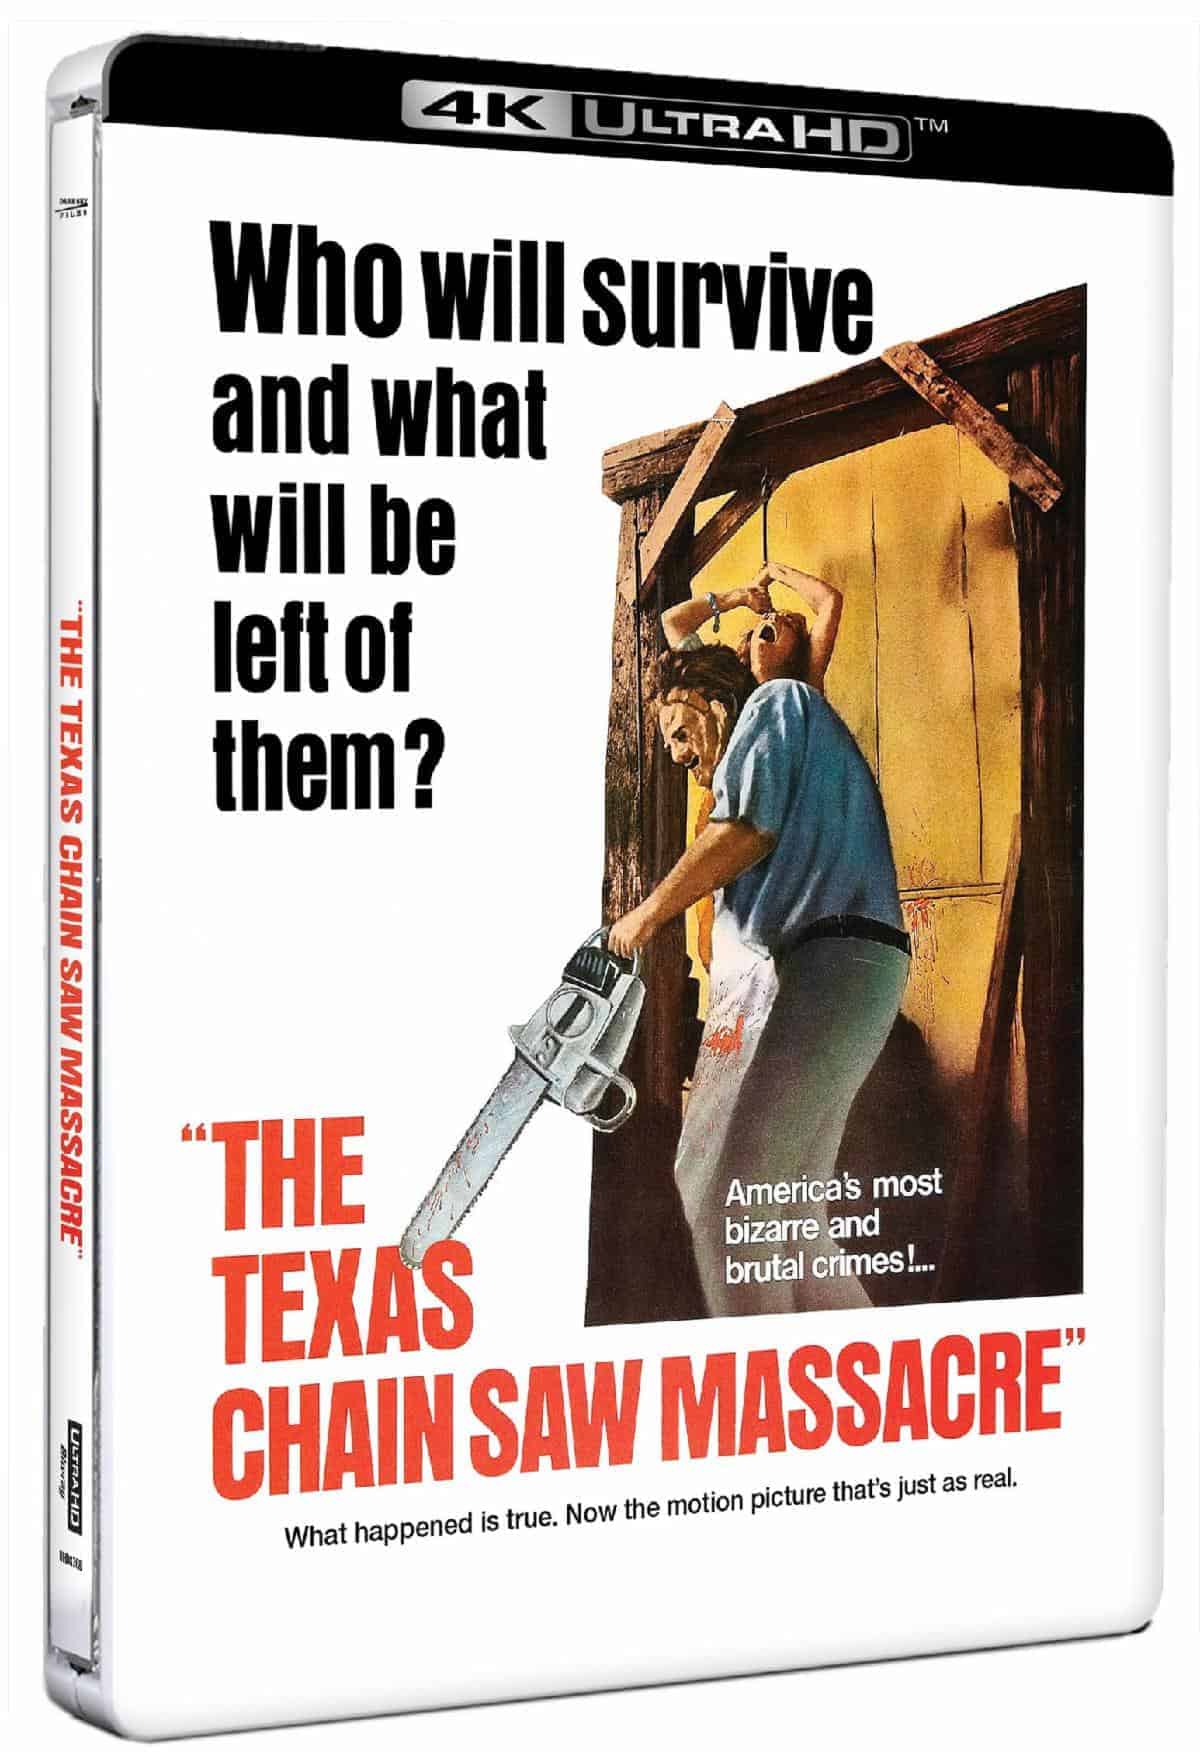 Texas Chainsaw Massacre comes to 4K UHD on February 28th from Dark Sky Films 18